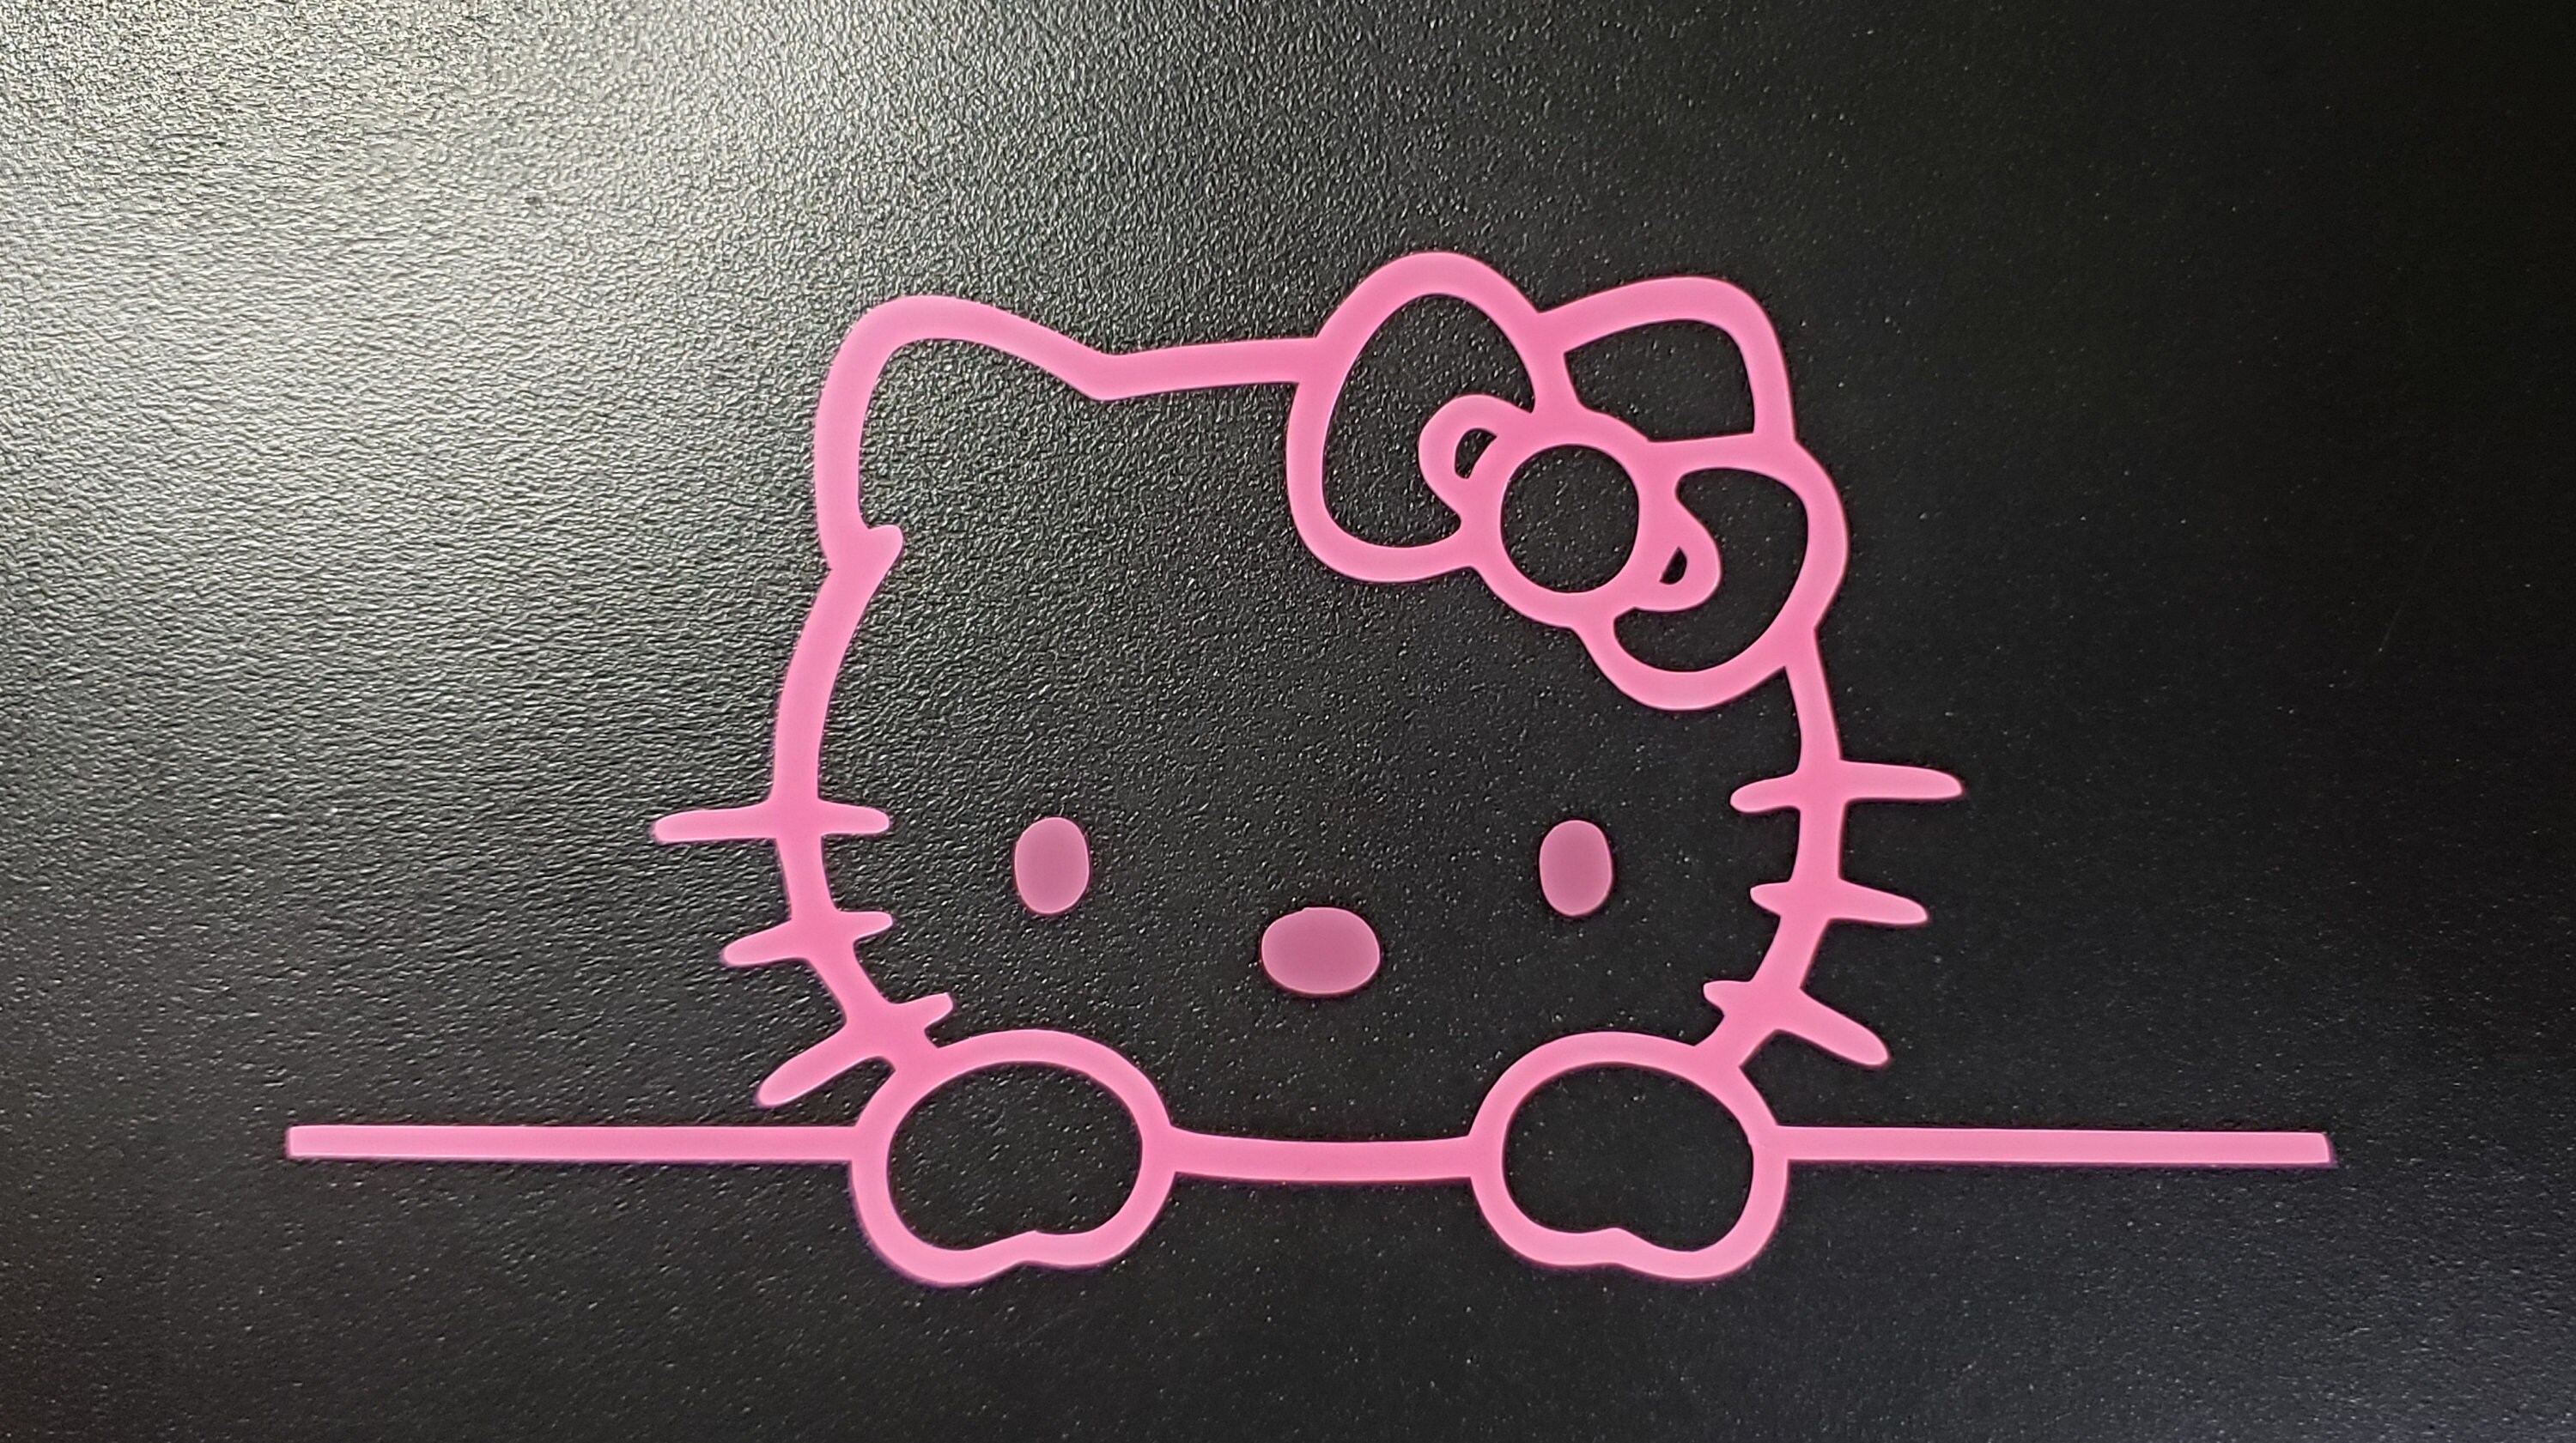 ION Graphics (11) Hello Kitty Bow Sticker Decal Die Cut Ribbon 5 Bumper  Locker Laptop Window - Sticks to Any Surface